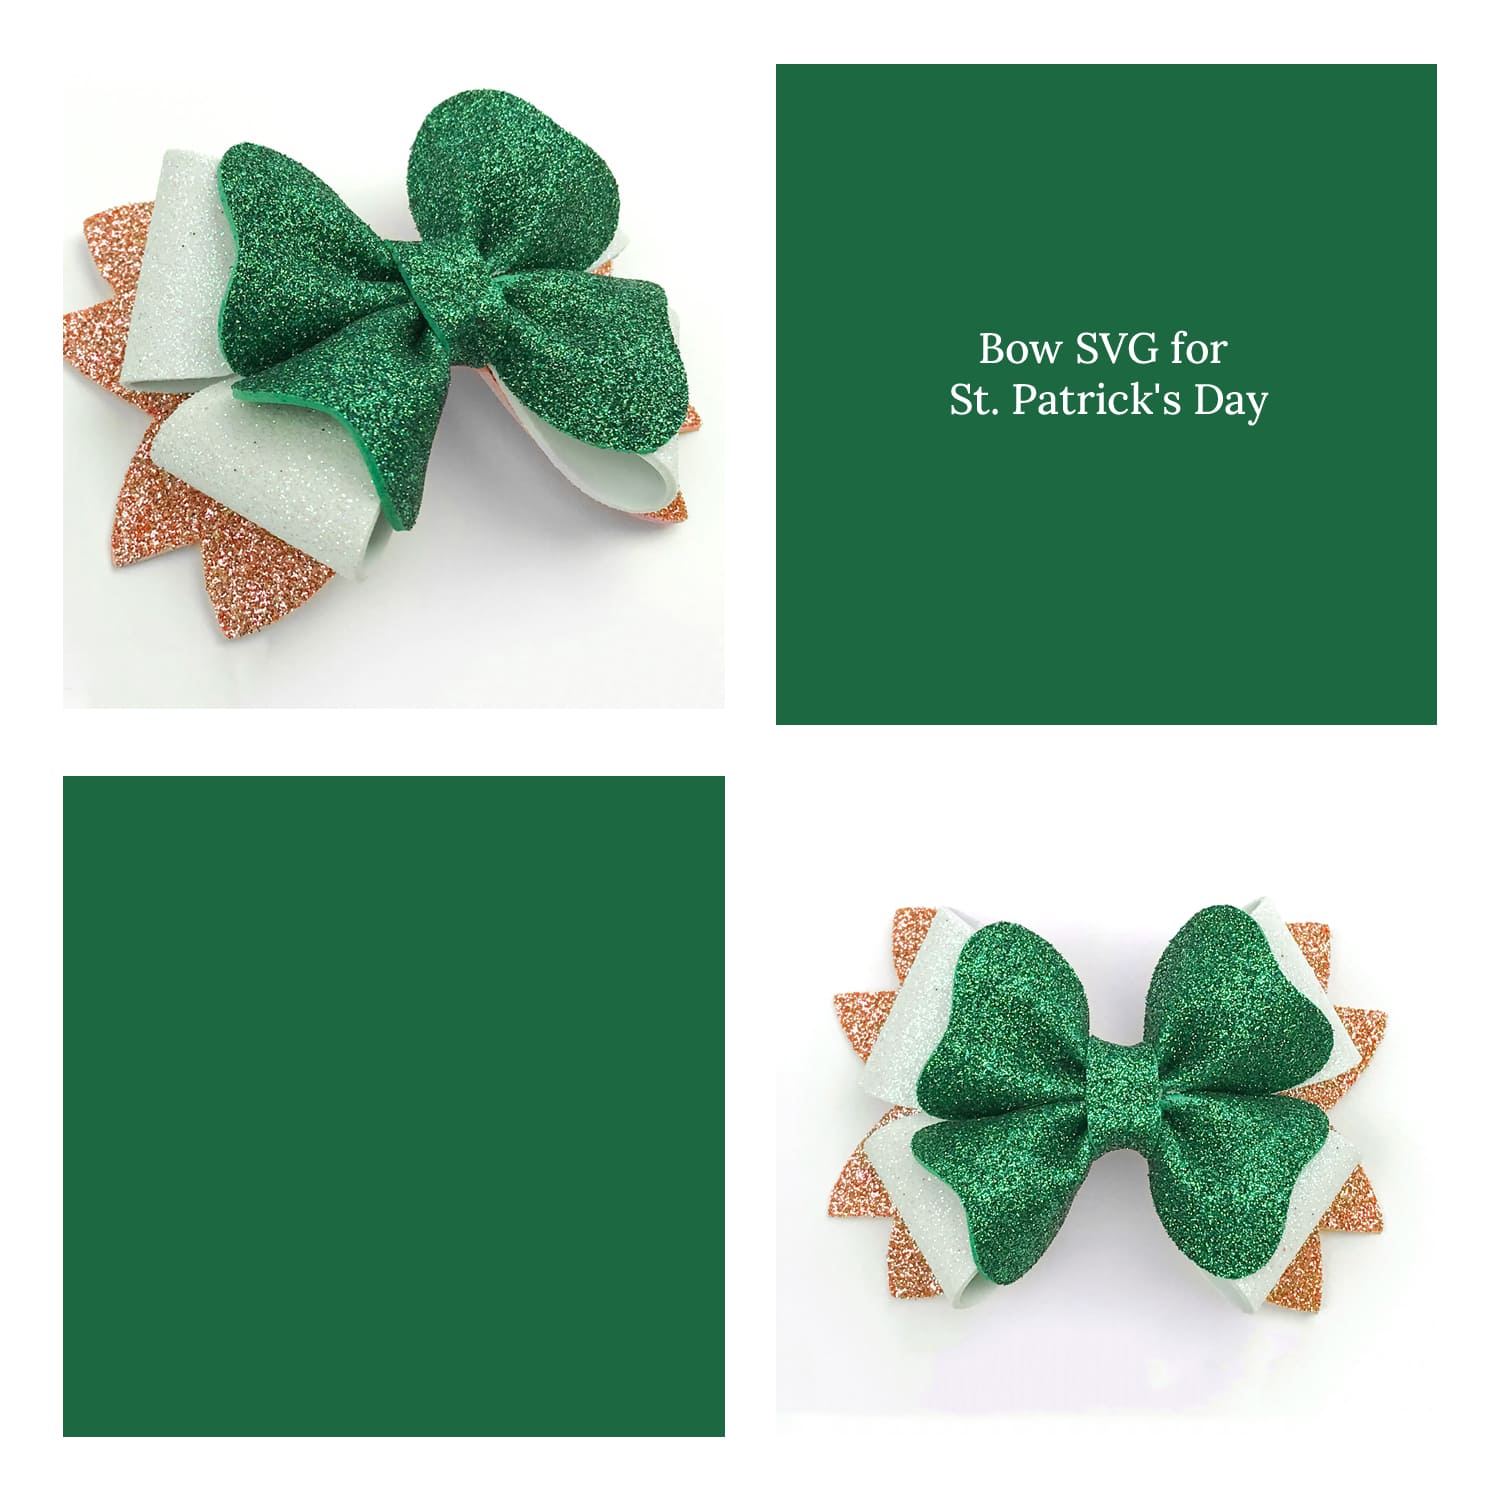 Bow SVG for St. Patrick's Day, Shamrock Hair Bow cut file cover.